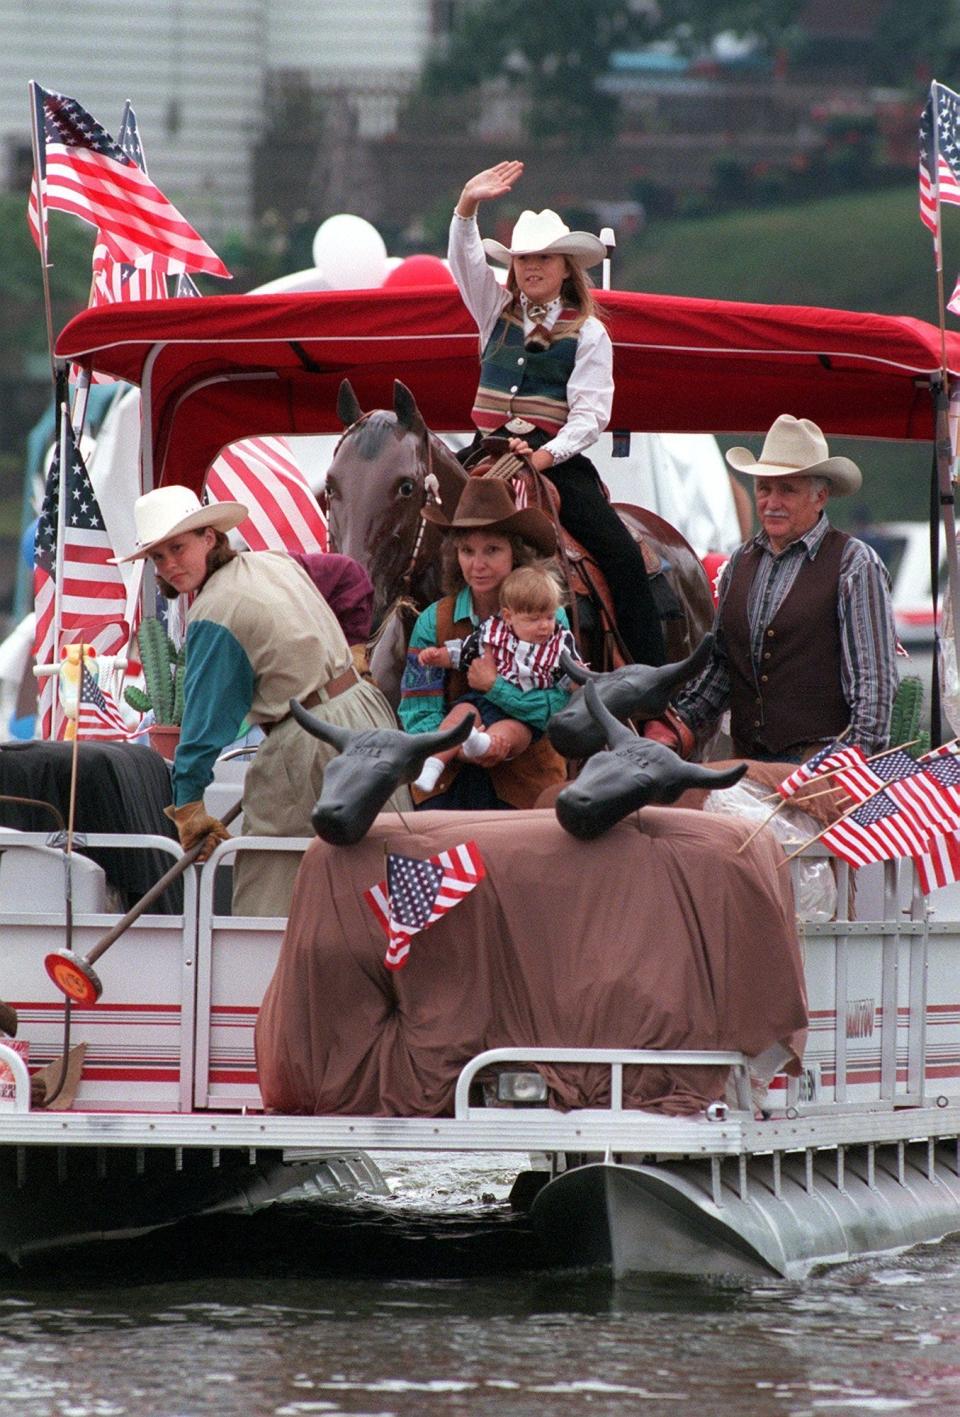 Stephanie Summers, 10, of Suffield Township, waves from astride the horse manikin on her grandparents' Wild West=themed boat in 1998.